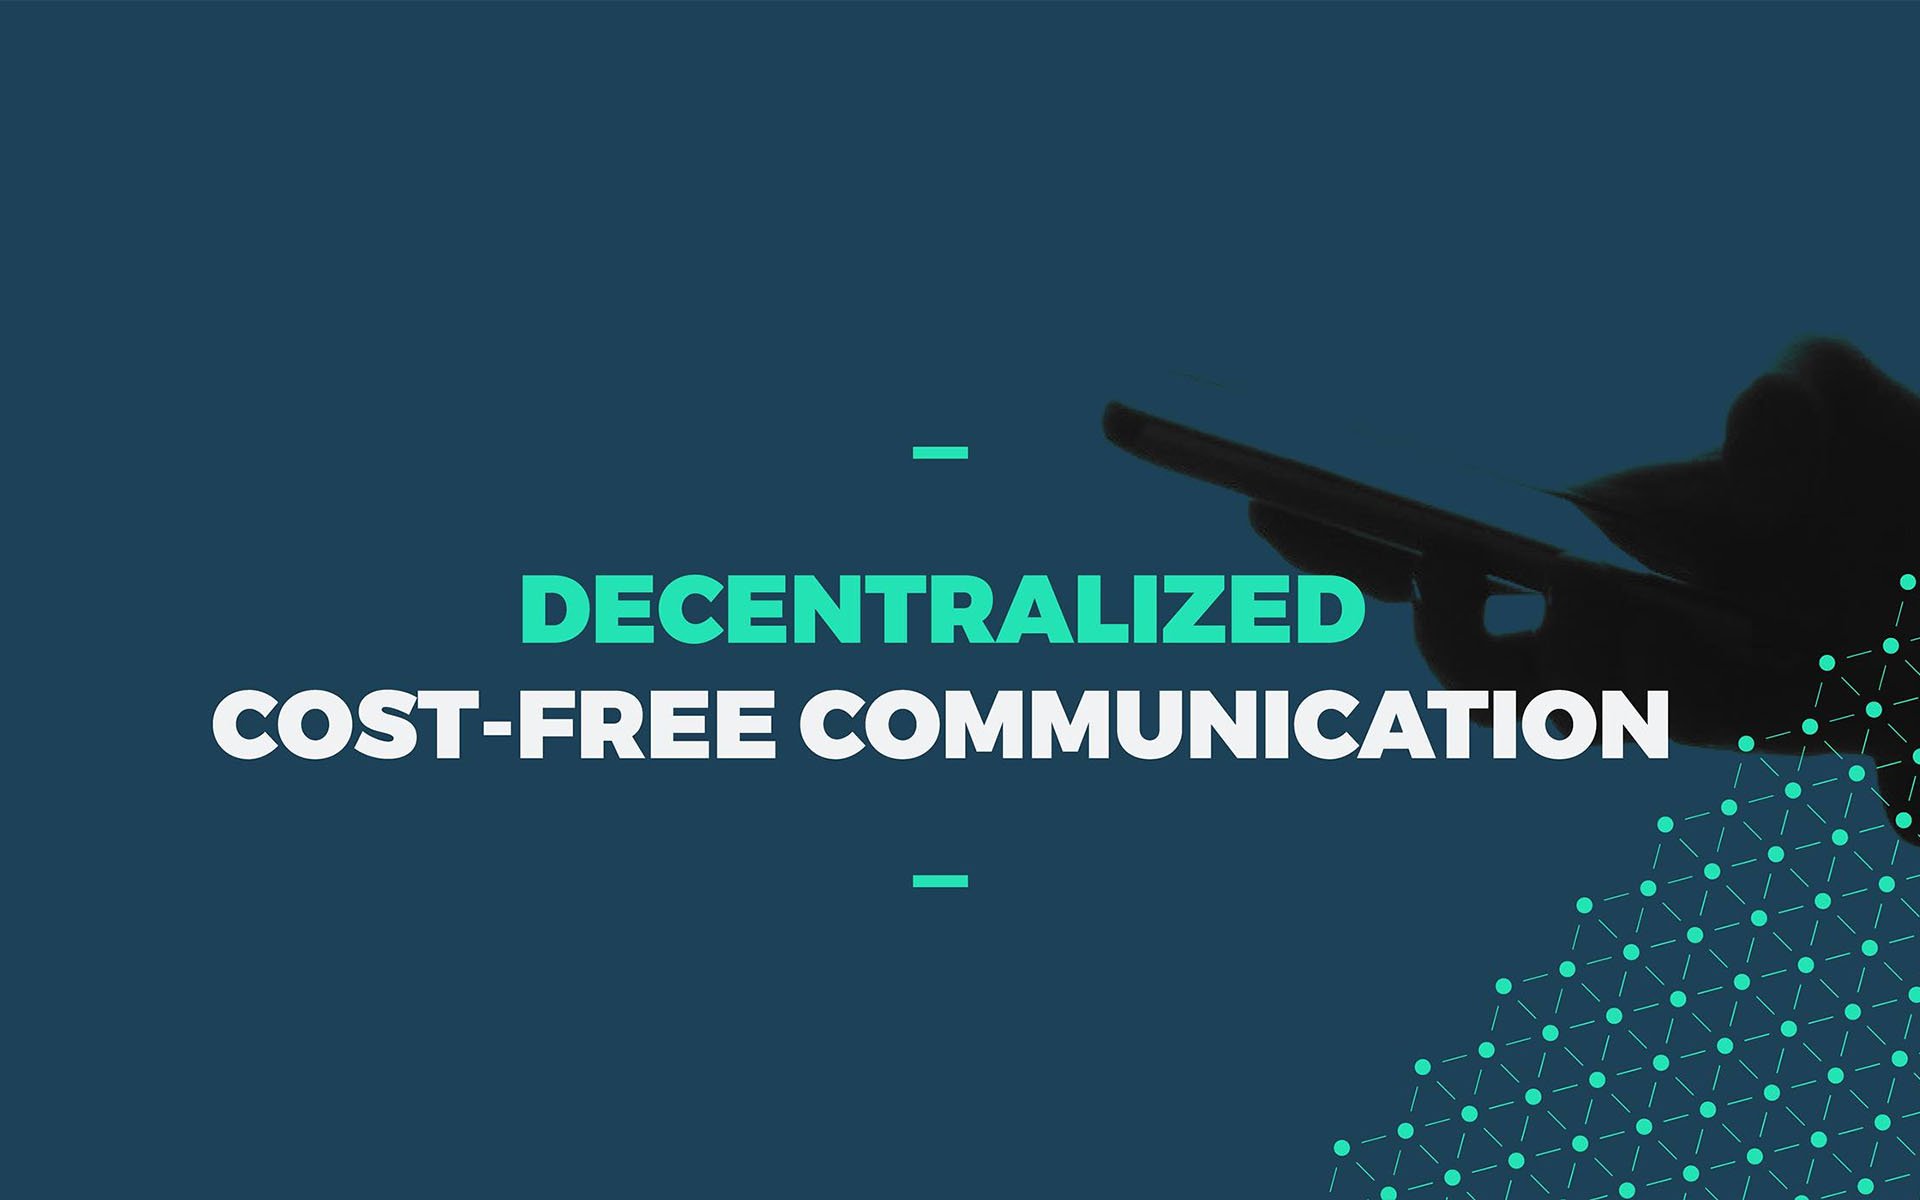 BlockMesh Disrupts the Global Communications Industry – ICO Will Launch 28 February, 2018